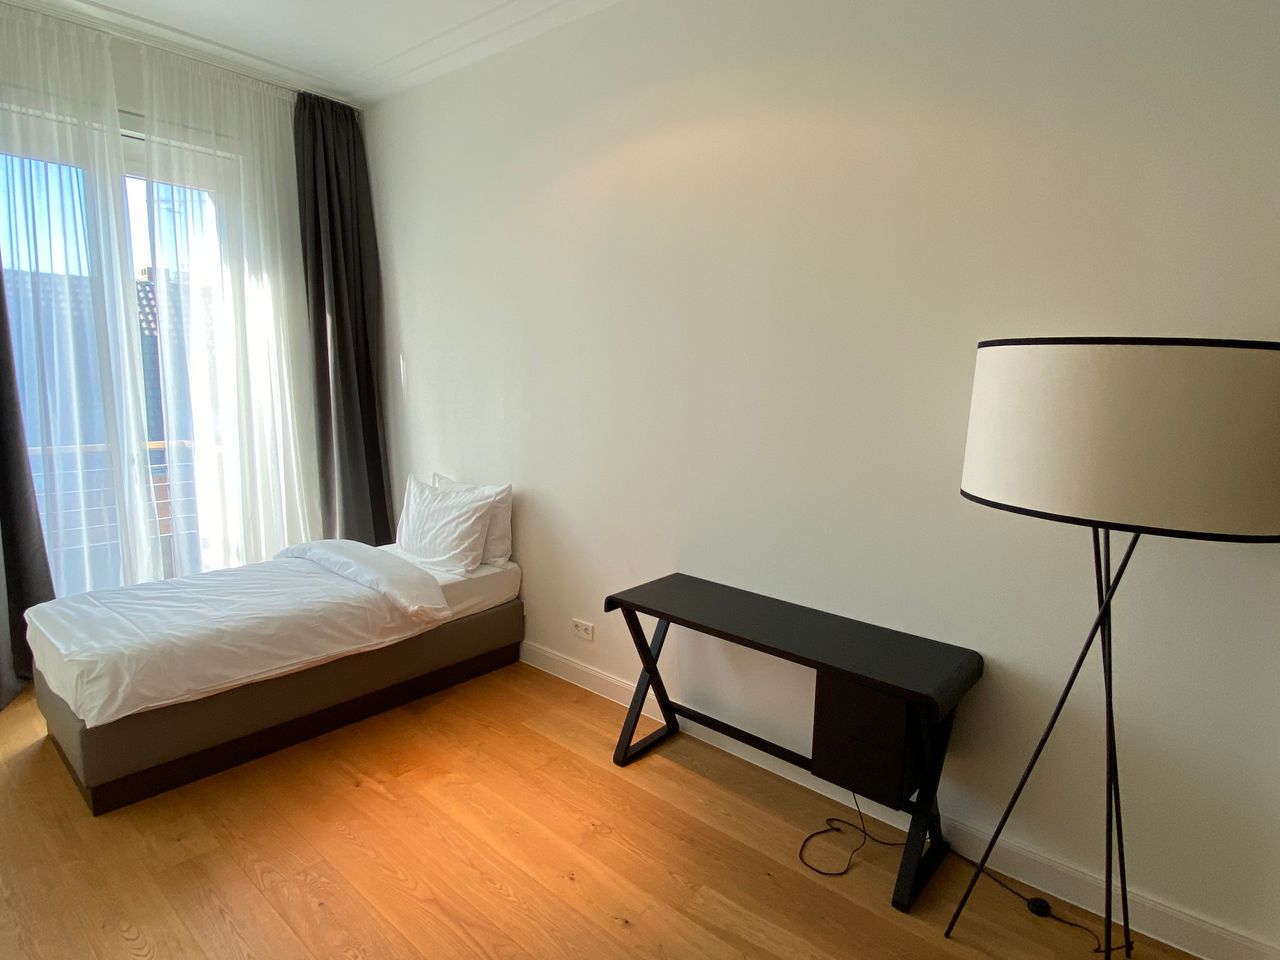 Beautiful and luxurious three-room apartment in a top location in the center of Düsseldorf